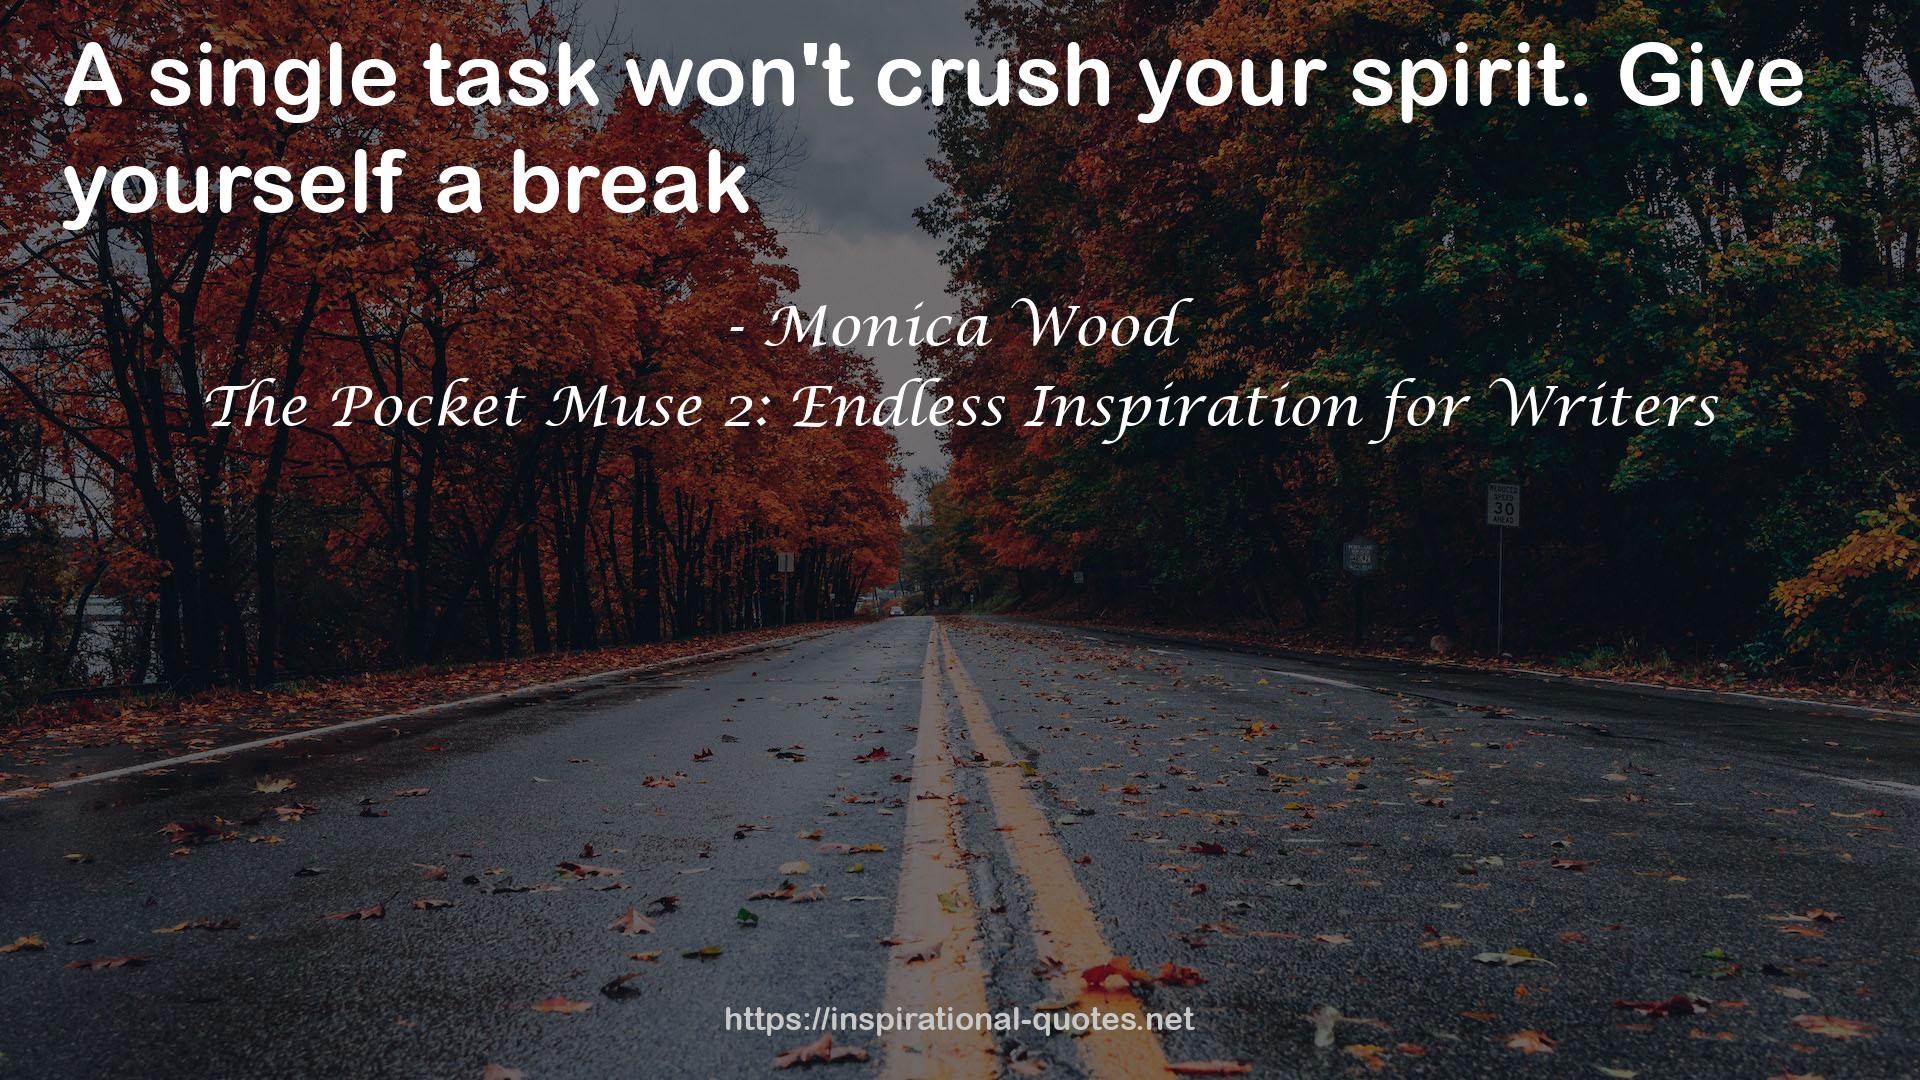 The Pocket Muse 2: Endless Inspiration for Writers QUOTES